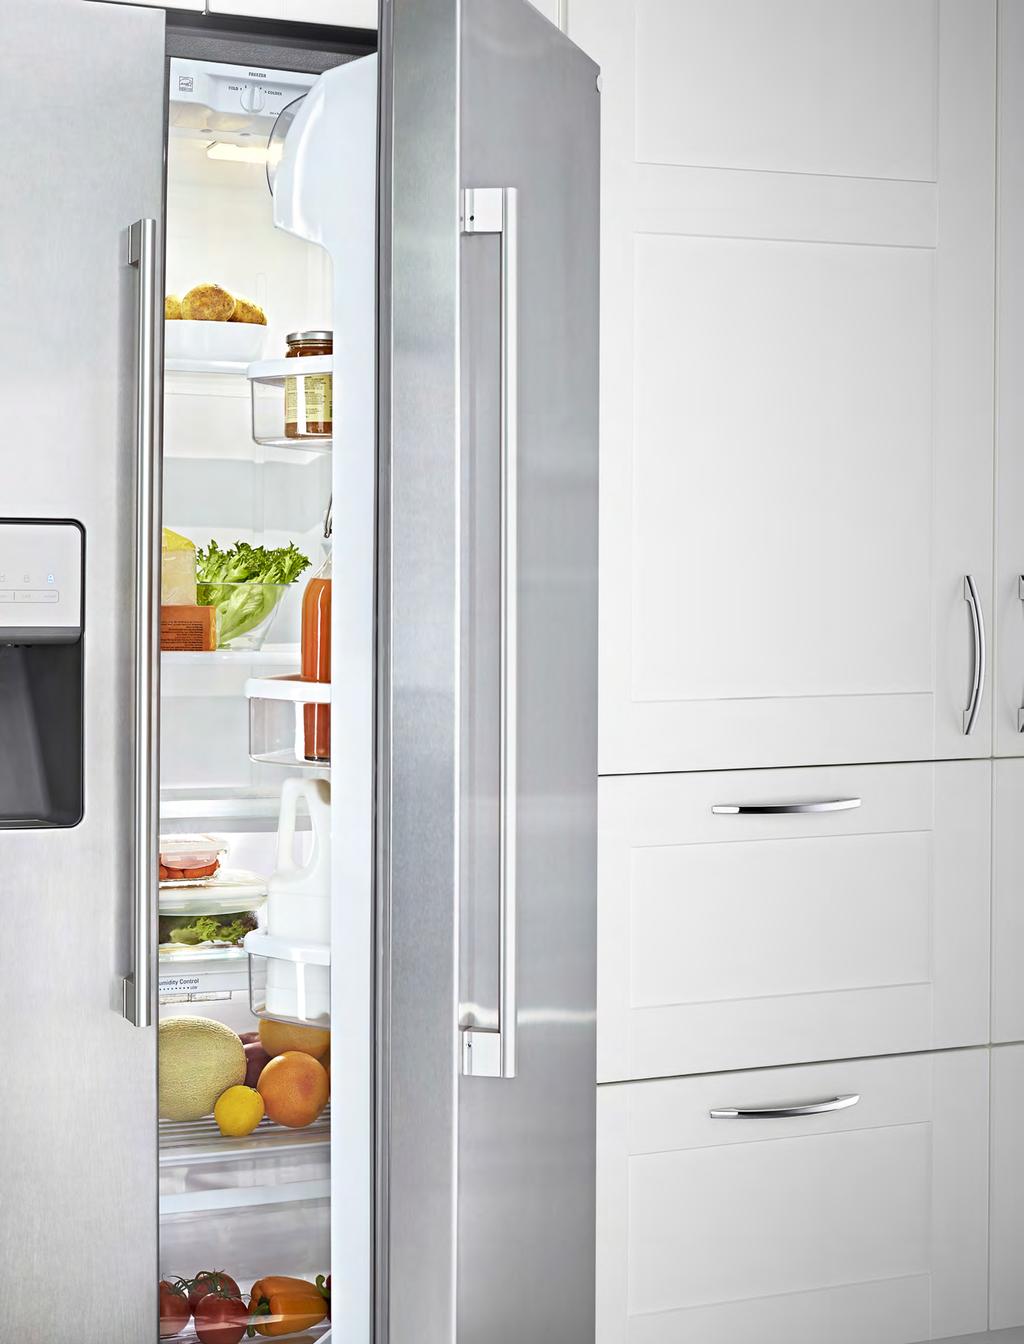 REFRIGERATORS Smart cooling. Less waste. Efficient cooling is a cornerstone of a sustainable kitchen. The better your fridge and freezer work, the less food you will waste.